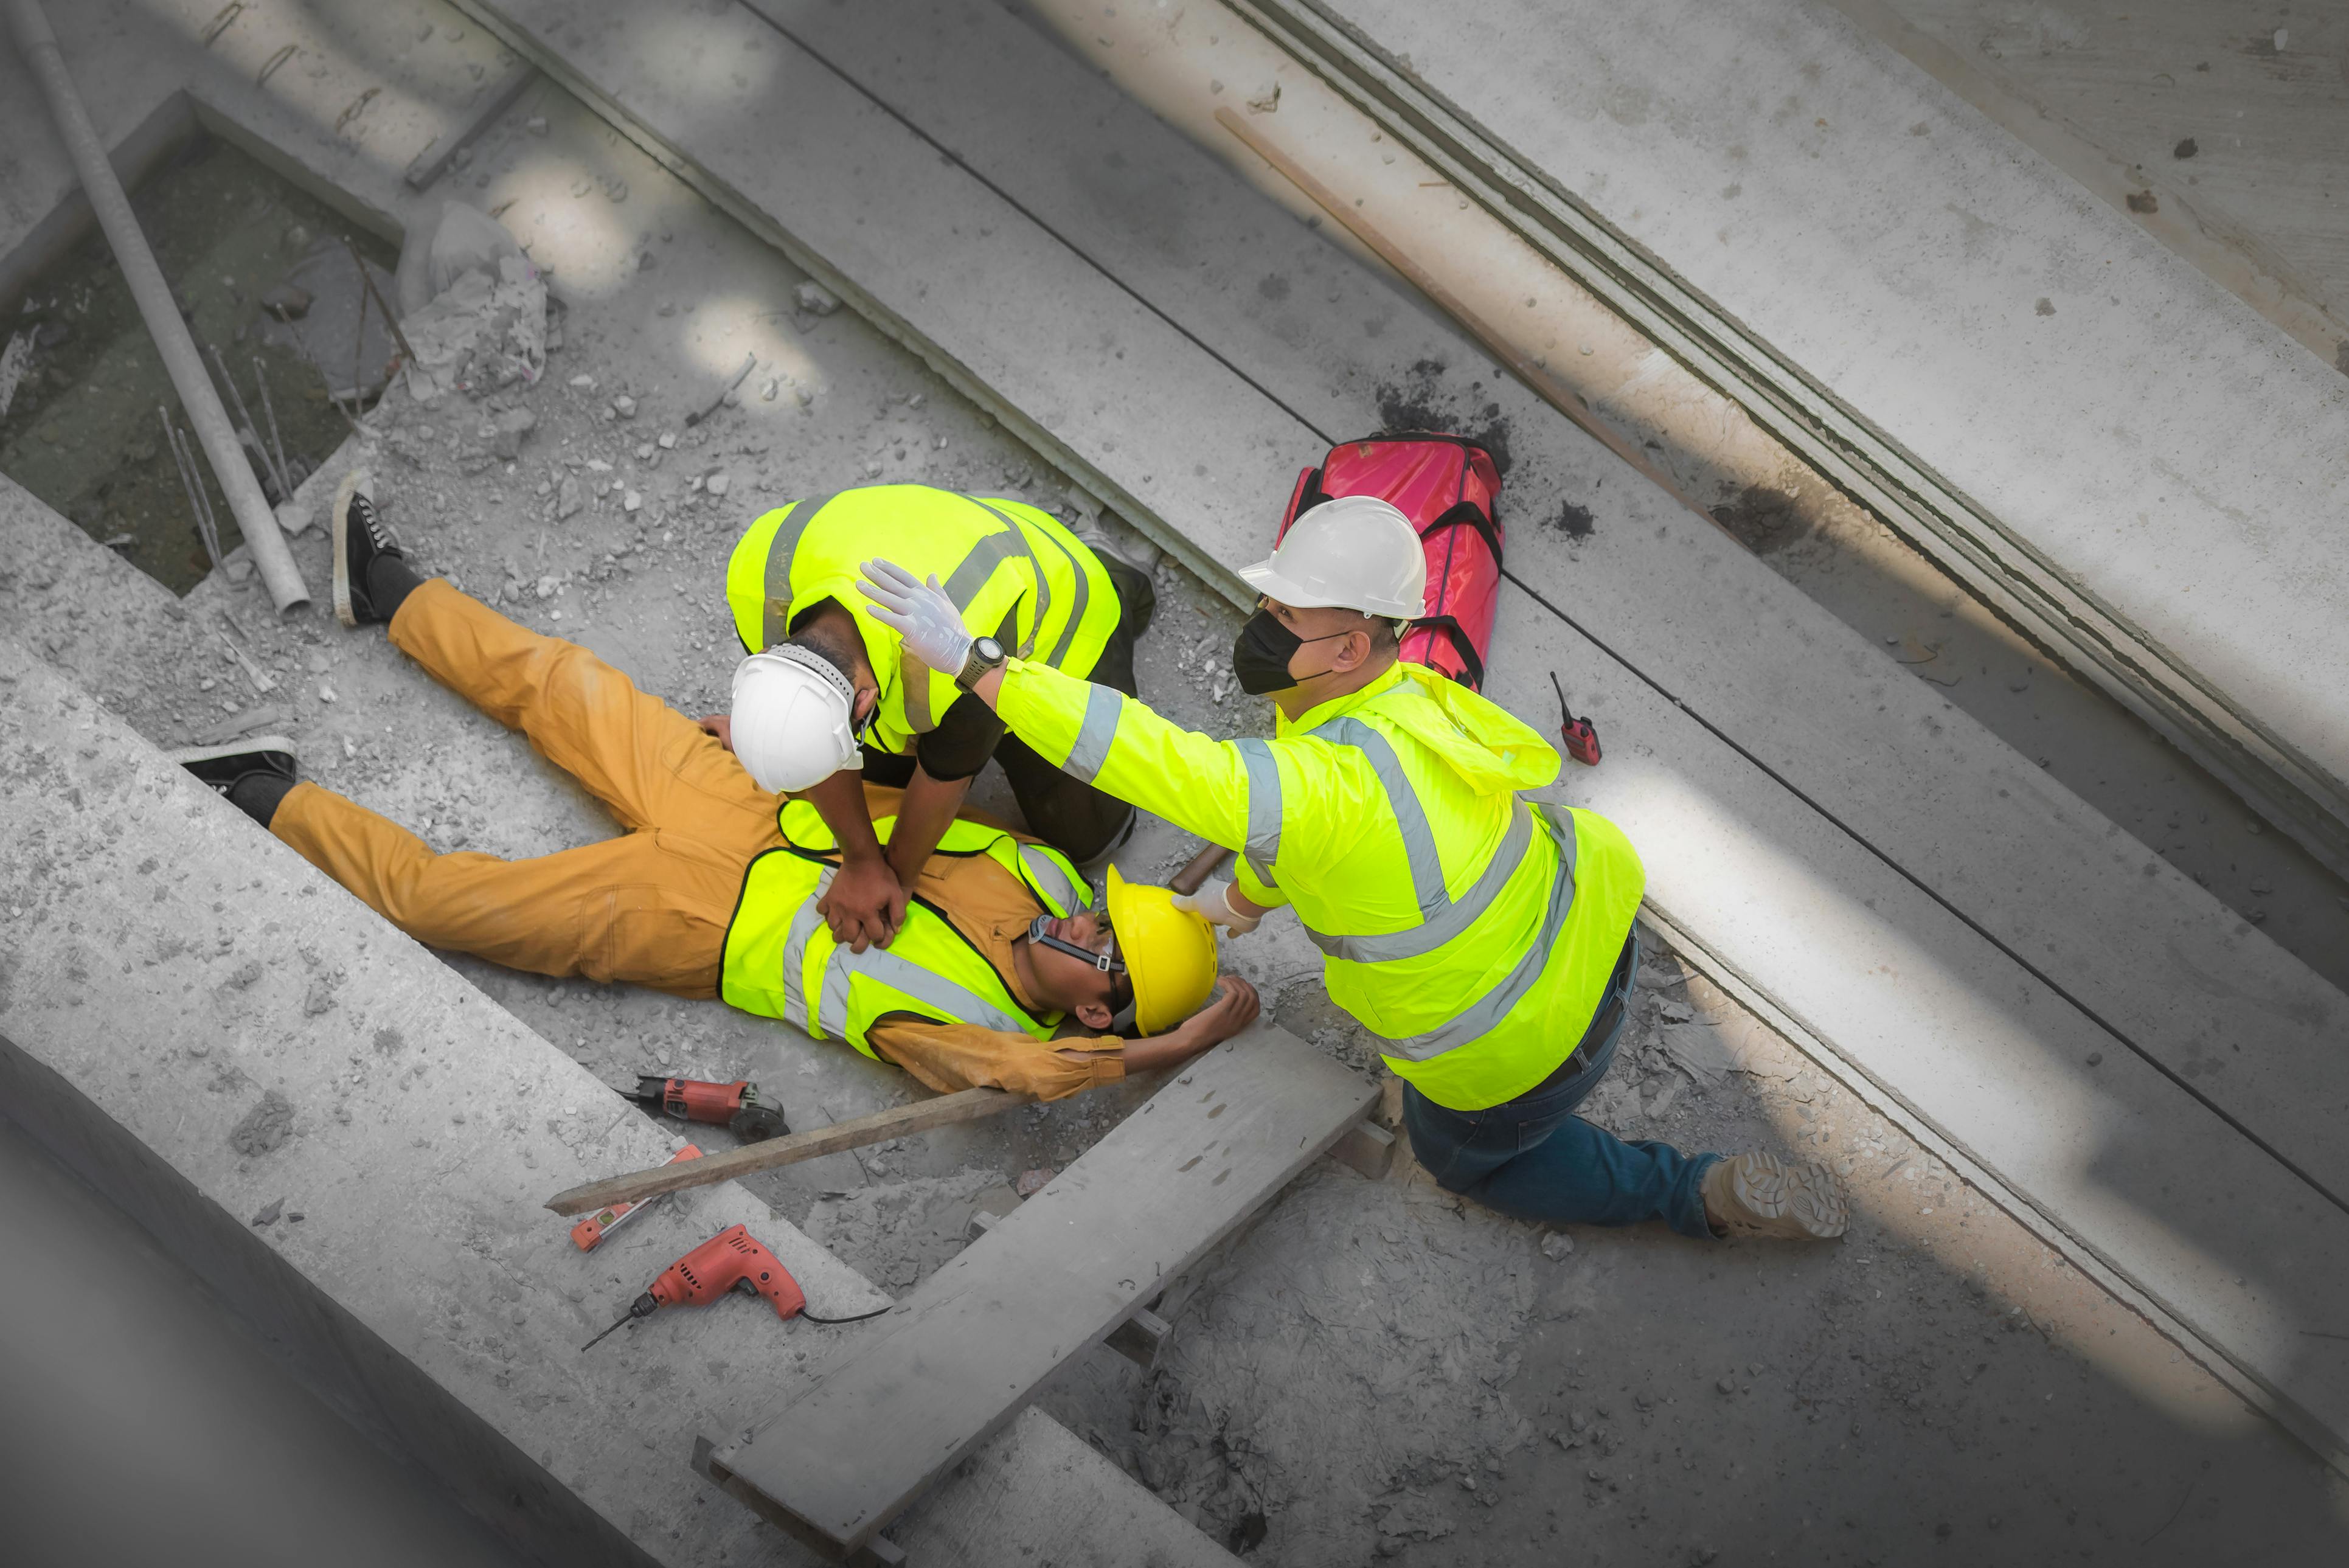 Construction worker injured on a construction site being aided by other construction workers